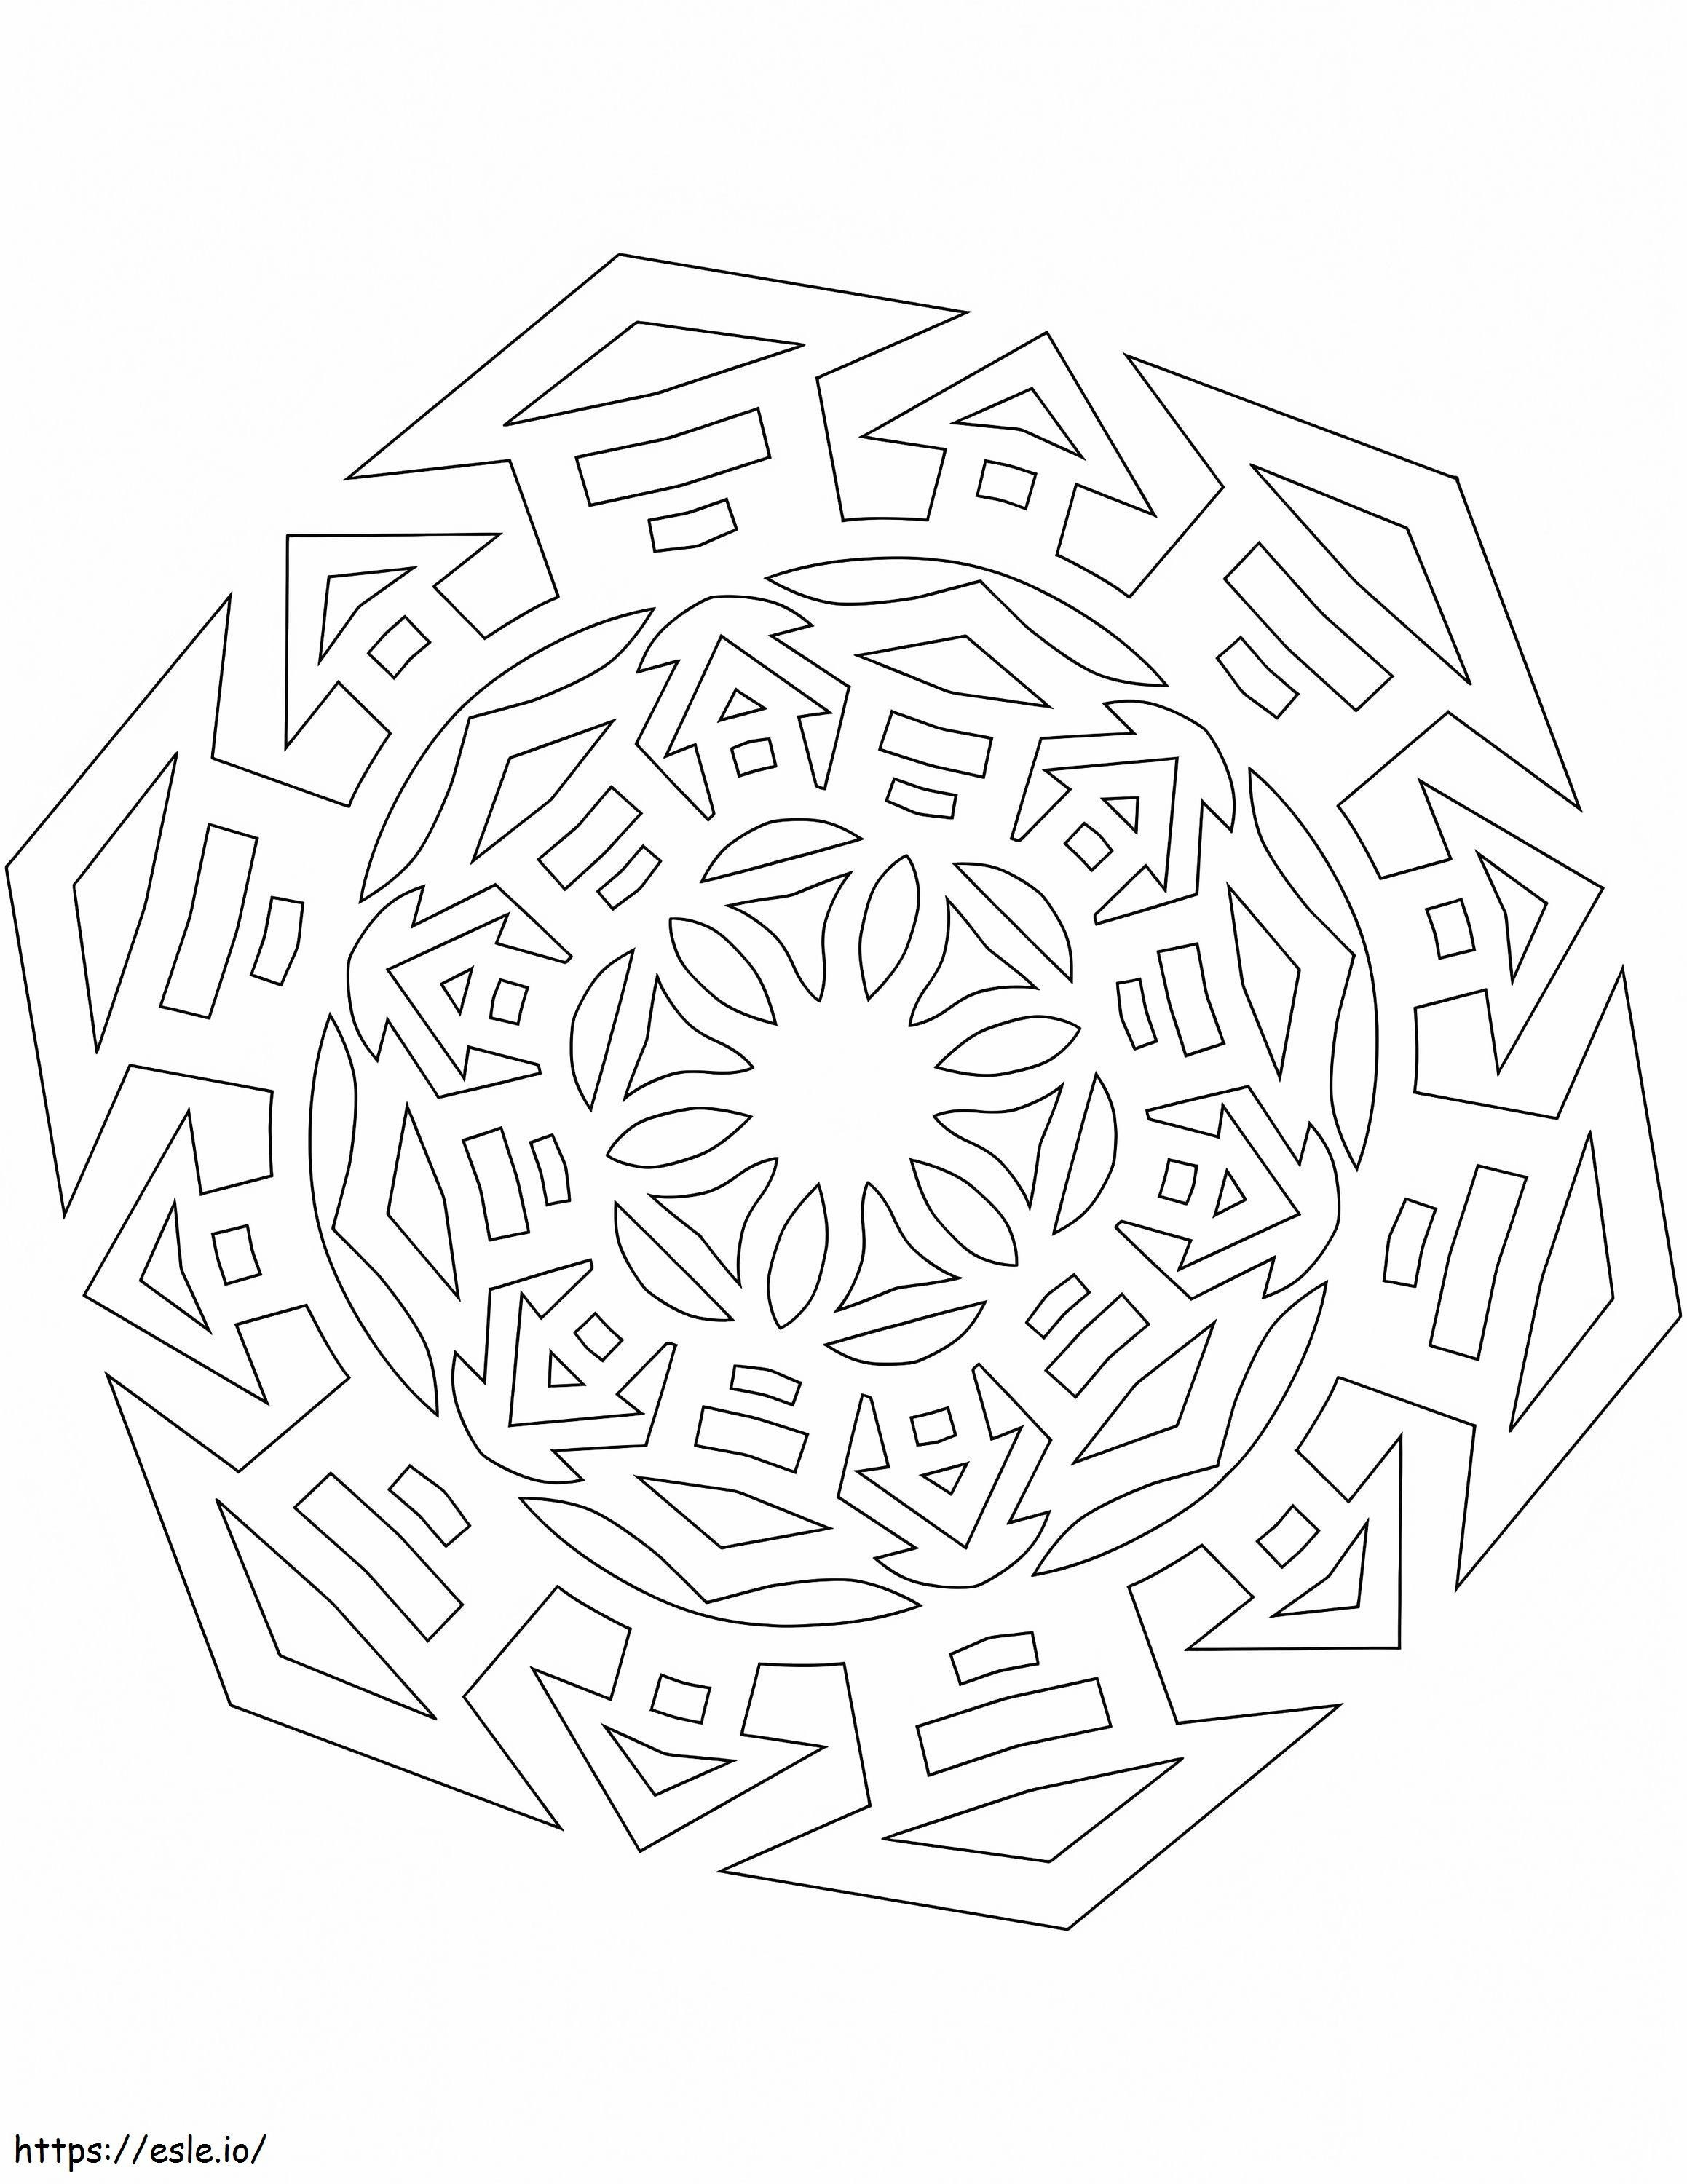 1590113481 Snowflake With Houses coloring page